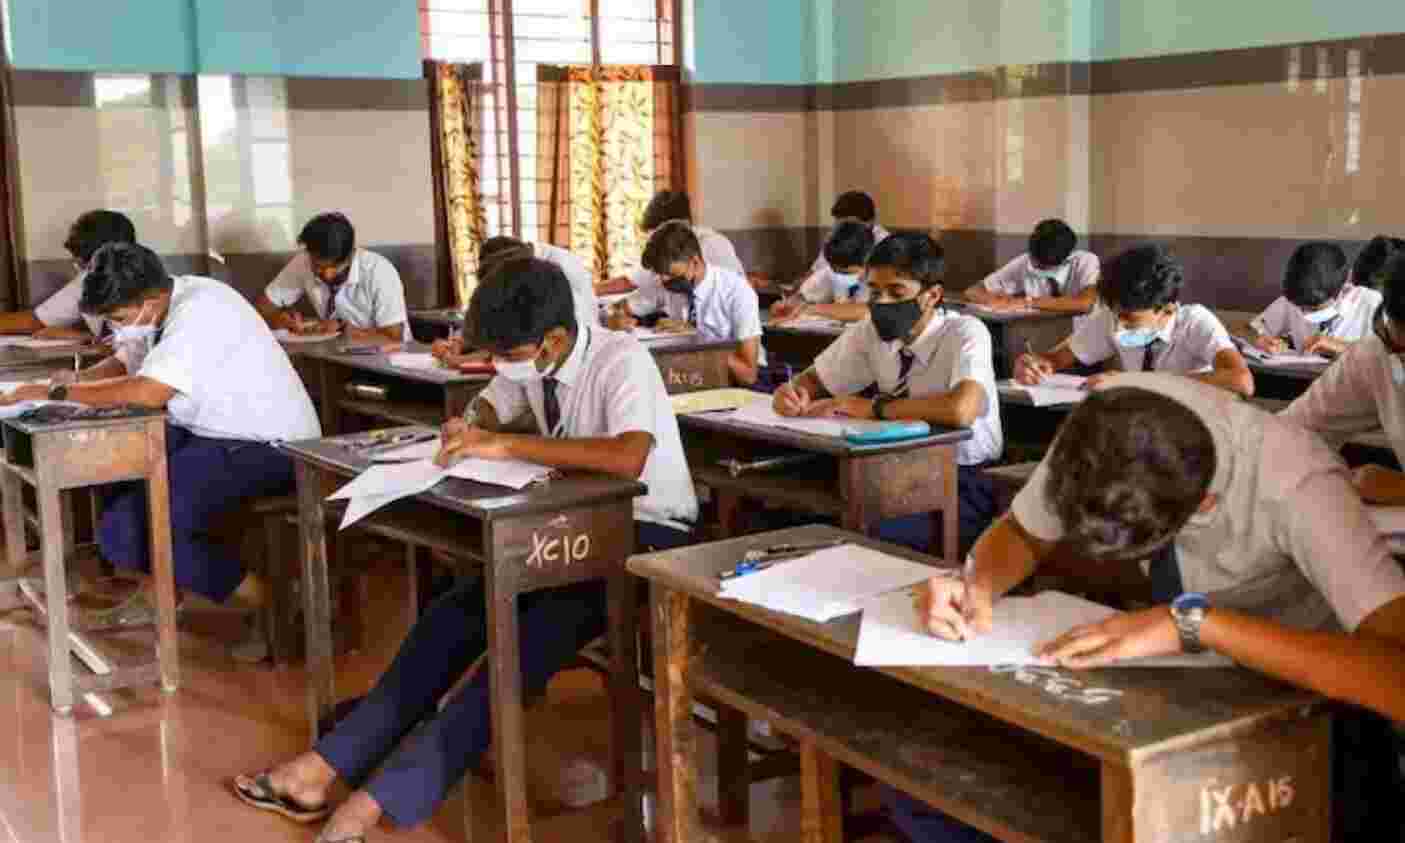 Post cancellation of exams, CBSE students worry about evaluation